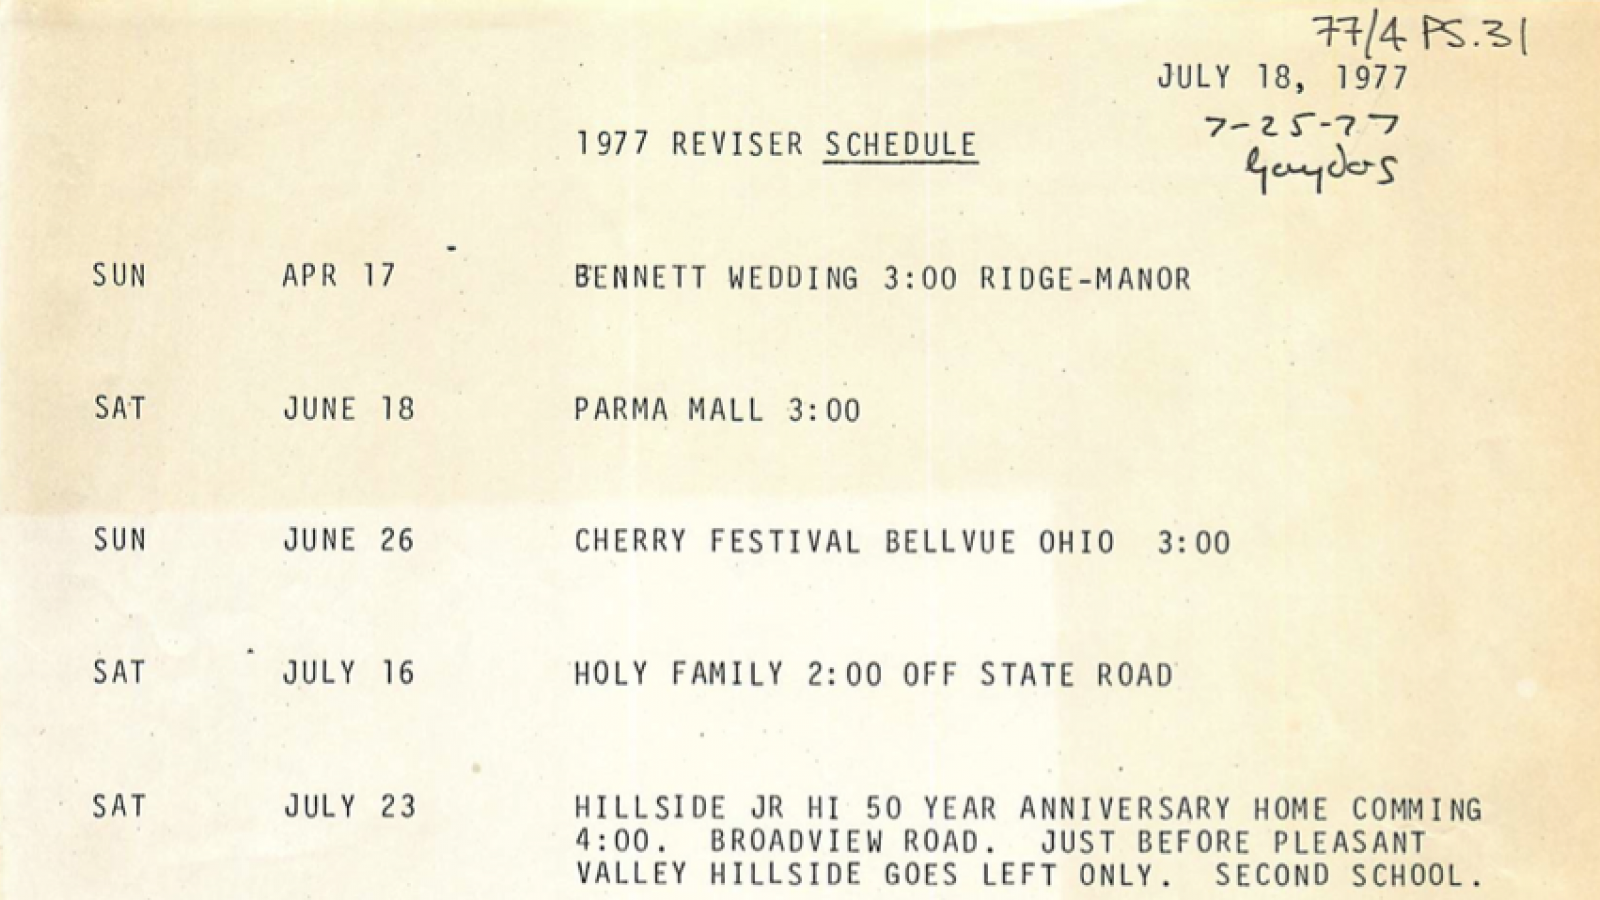 Schedule for the 1977 performances of the St. Theodosius Folk Dancers.